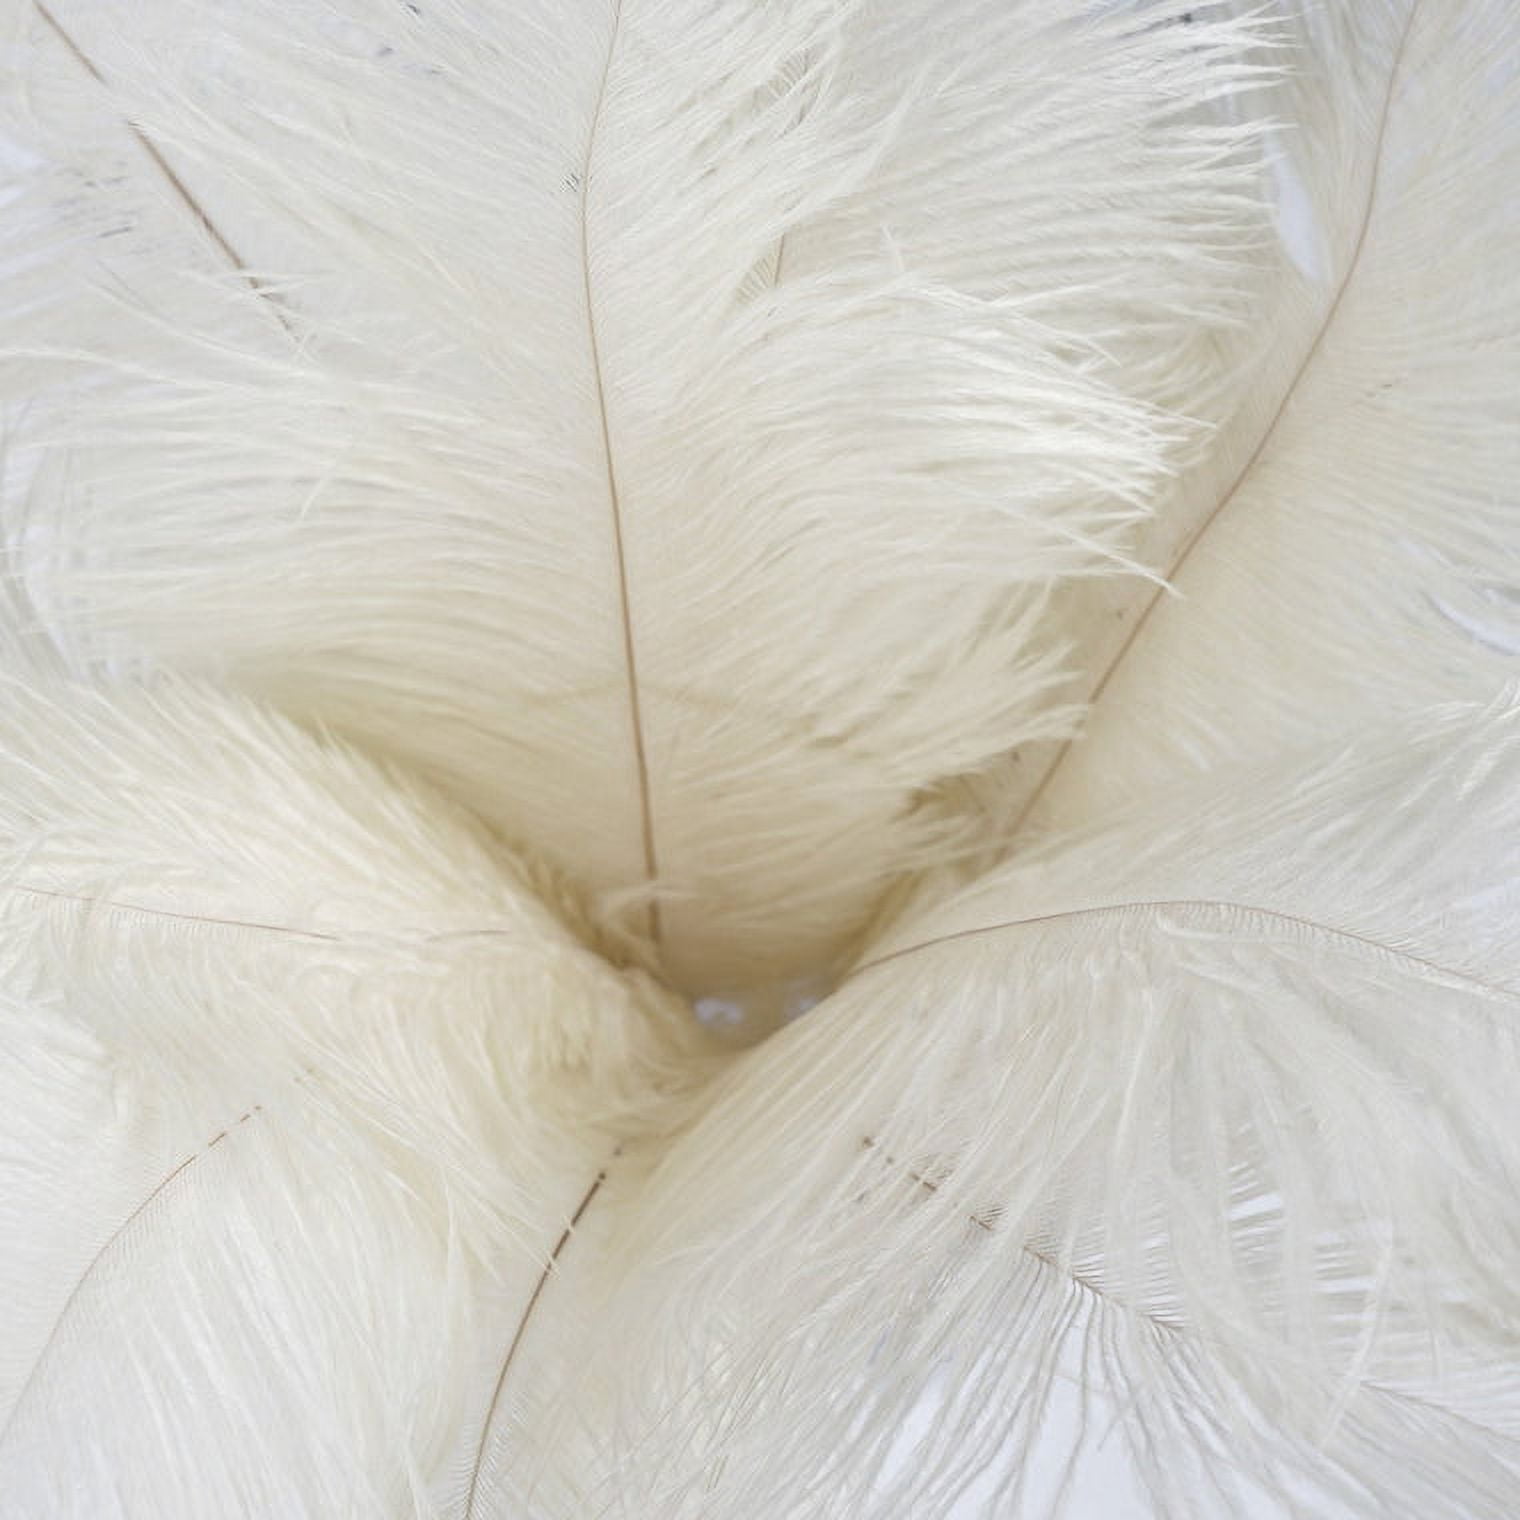 Large Ivory Ostrich Feathers/ /Wings/Plumes/Horse Ostrich Feathers  Wholesale Dozens Bulk 22-24 inch 5 Pieces Wedding Centerpieces Crafts DIY  PROM INDIAN FEATHER